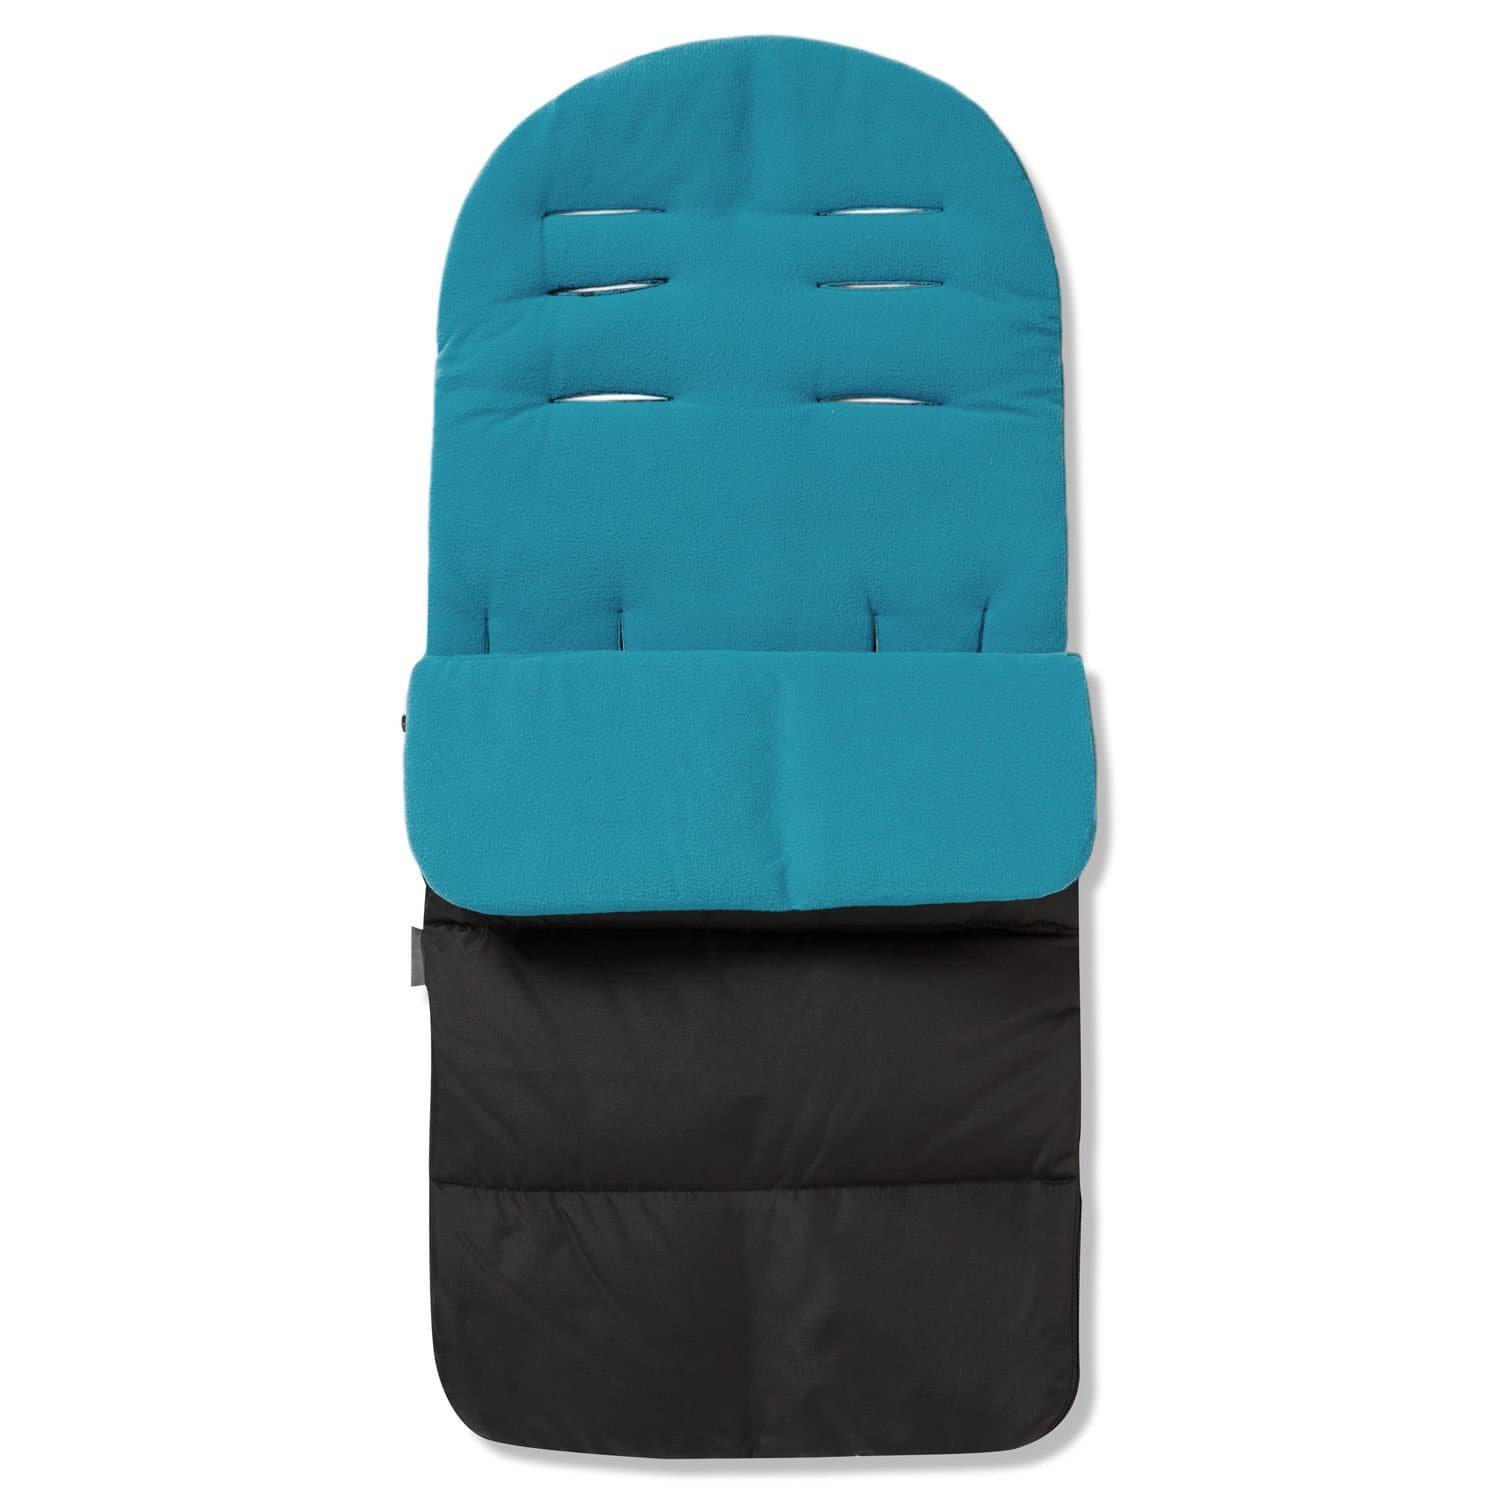 Premium Footmuff / Cosy Toes Compatible with Emmaljunga - Ocean Blue / Fits All Models | For Your Little One